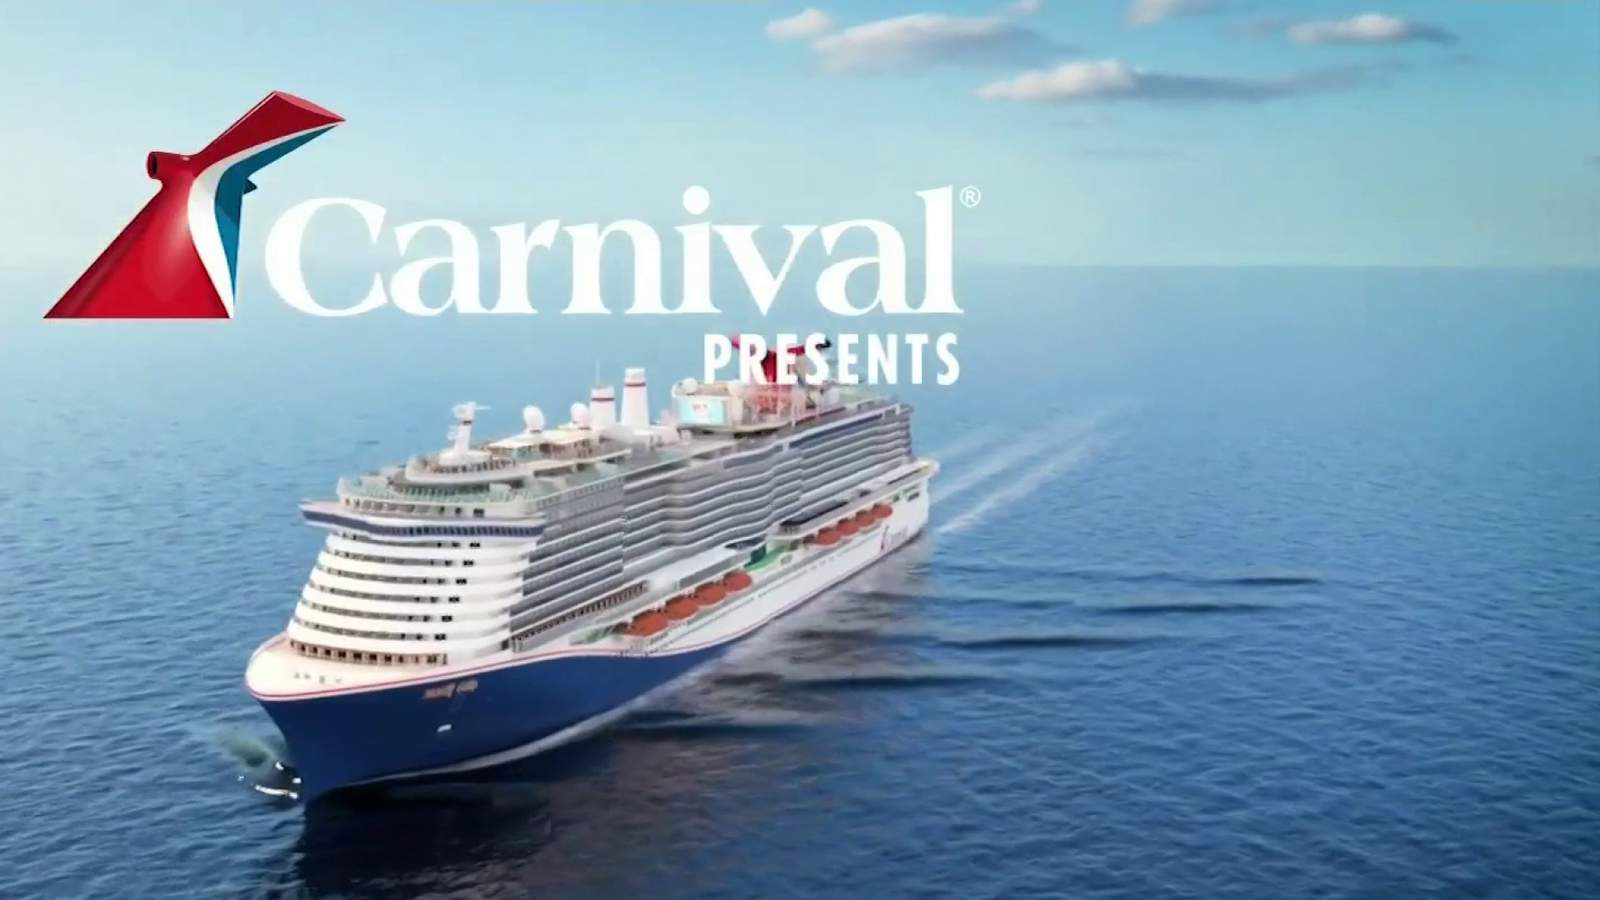 Carnival Cruise Line announces additional cancellations